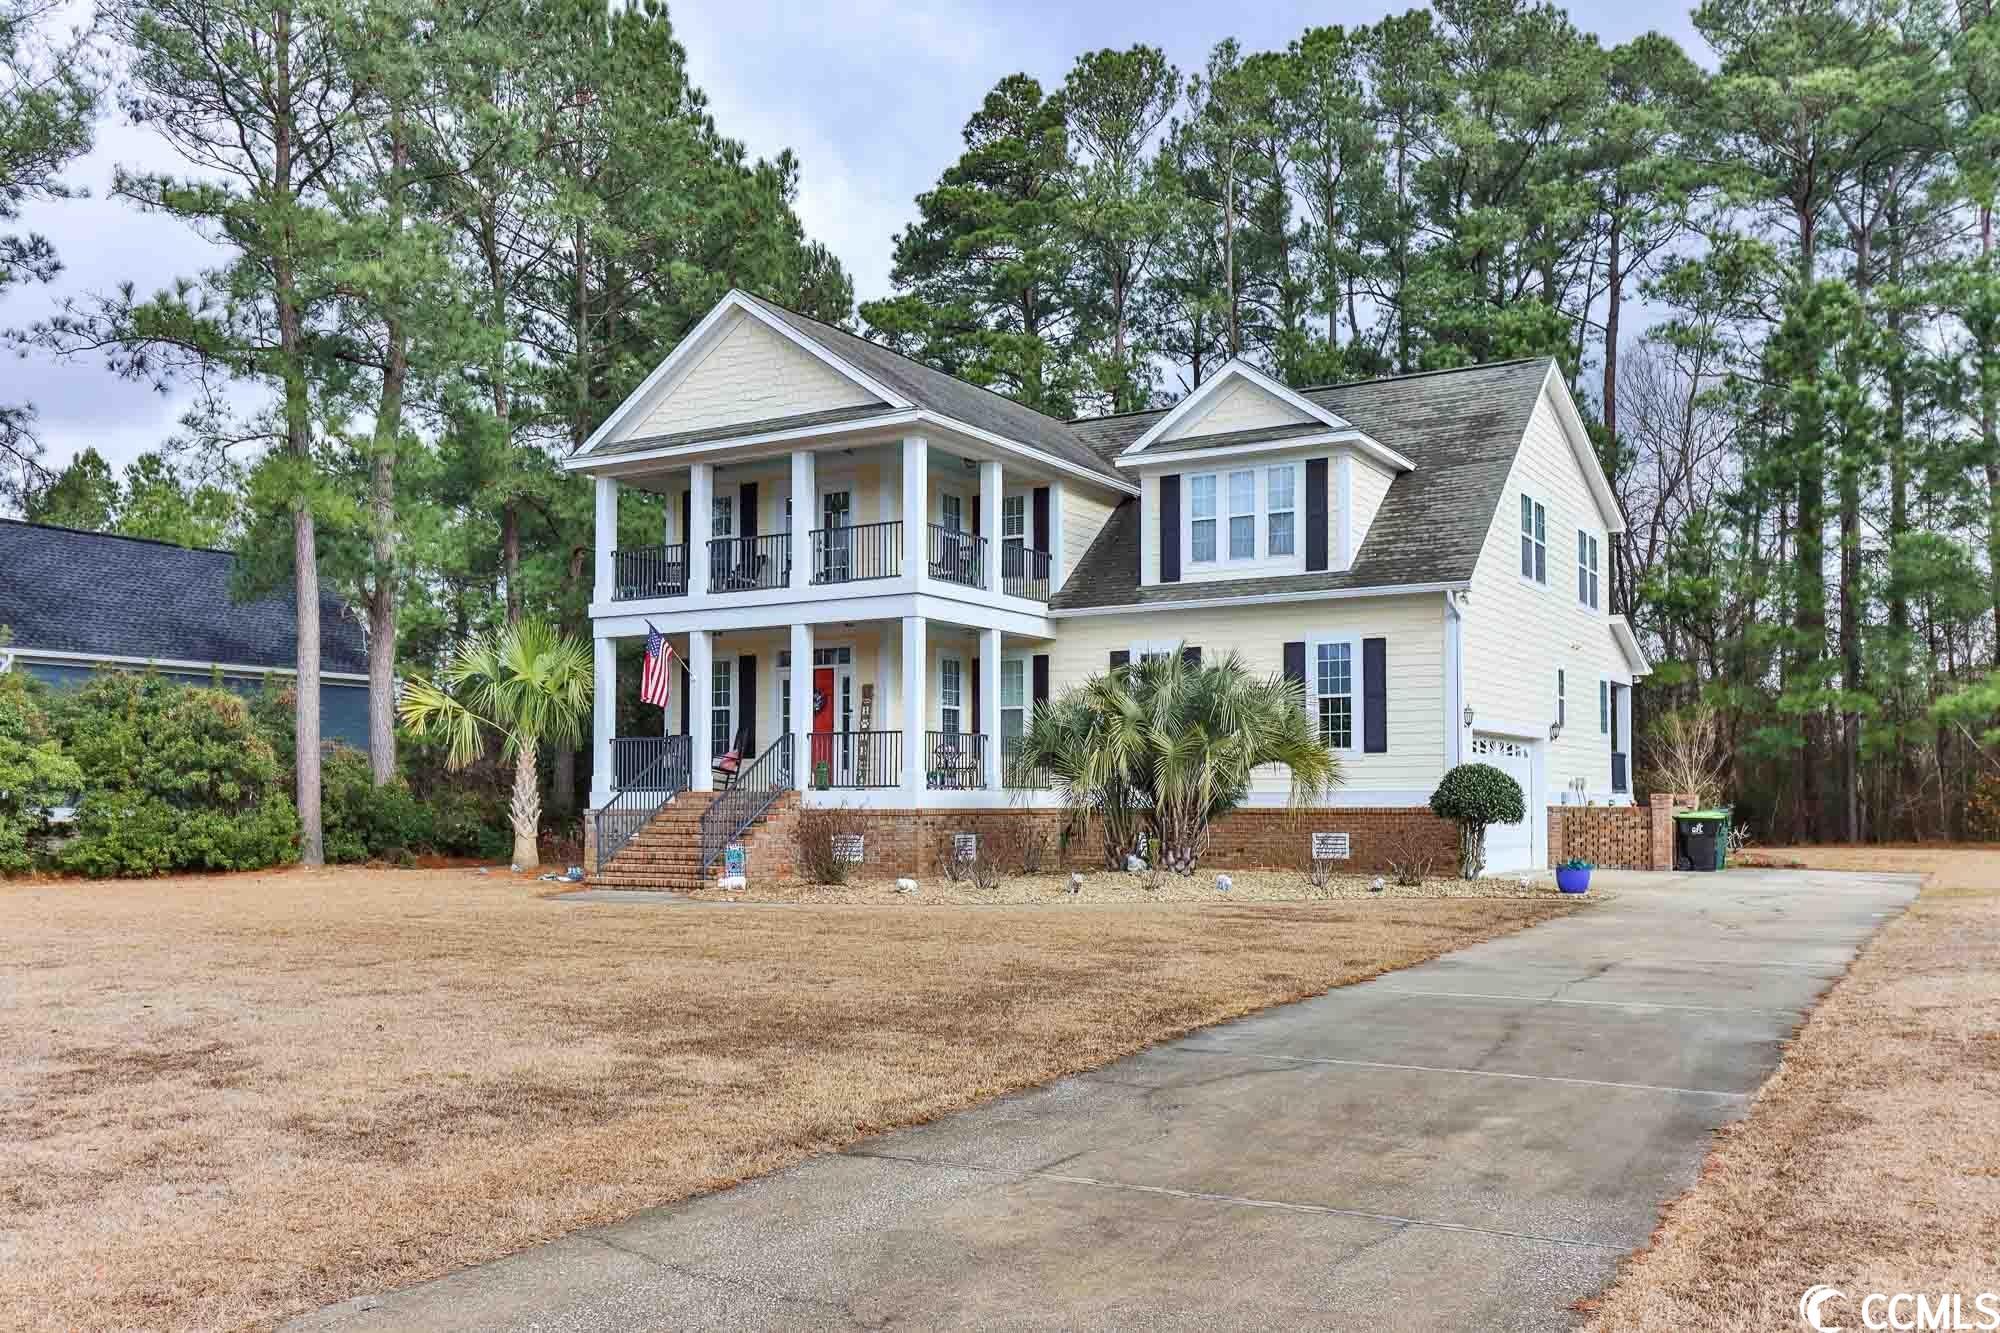 Photo one of 129 Pottery Landing Dr. Conway SC 29527 | MLS 2402692